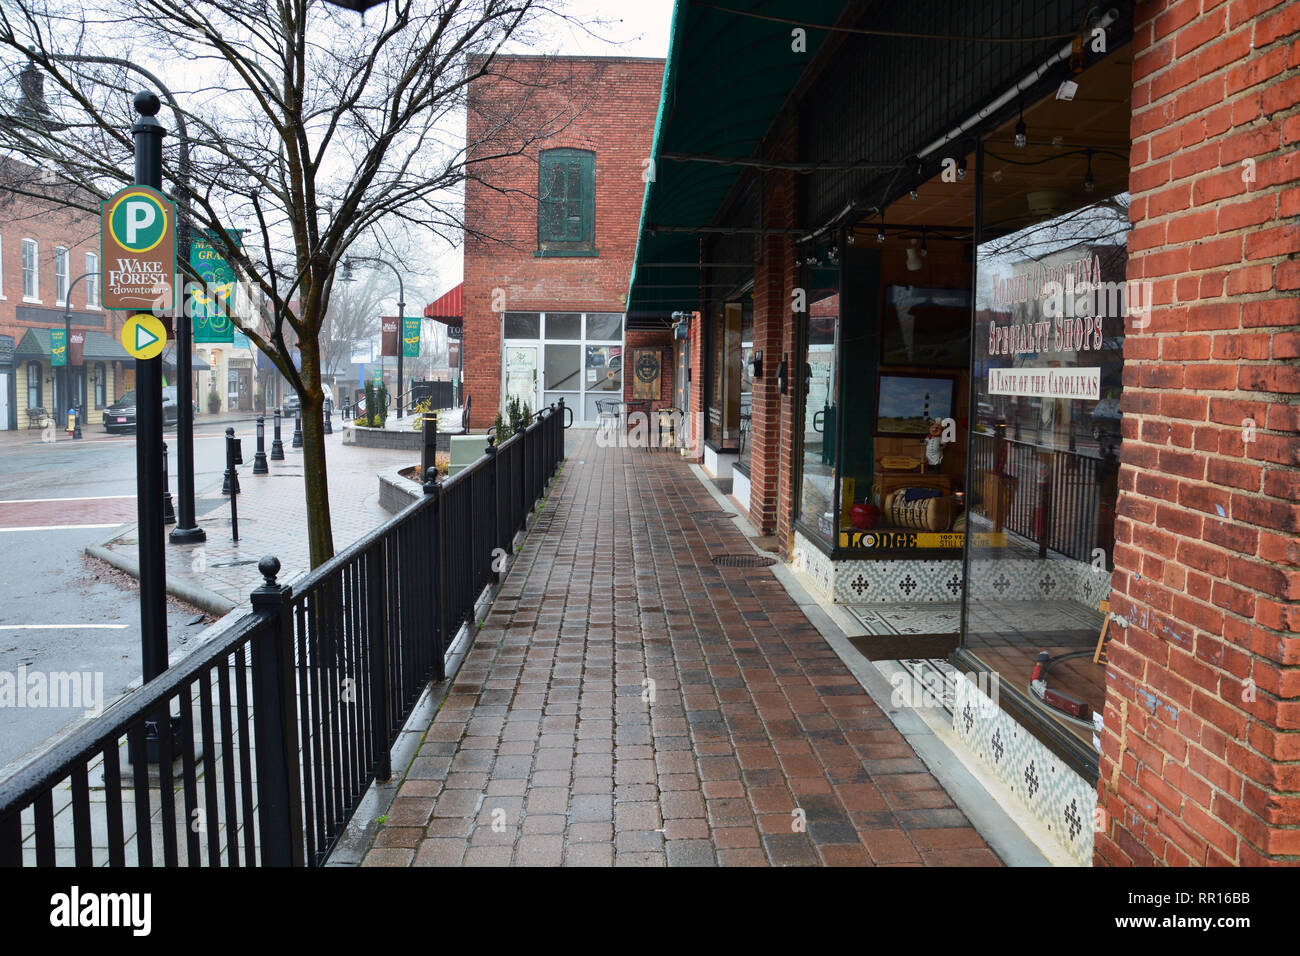 A rainy morning keeps shoppers away in the business district of historic downtown Wake Forest, North Carolina. Stock Photo